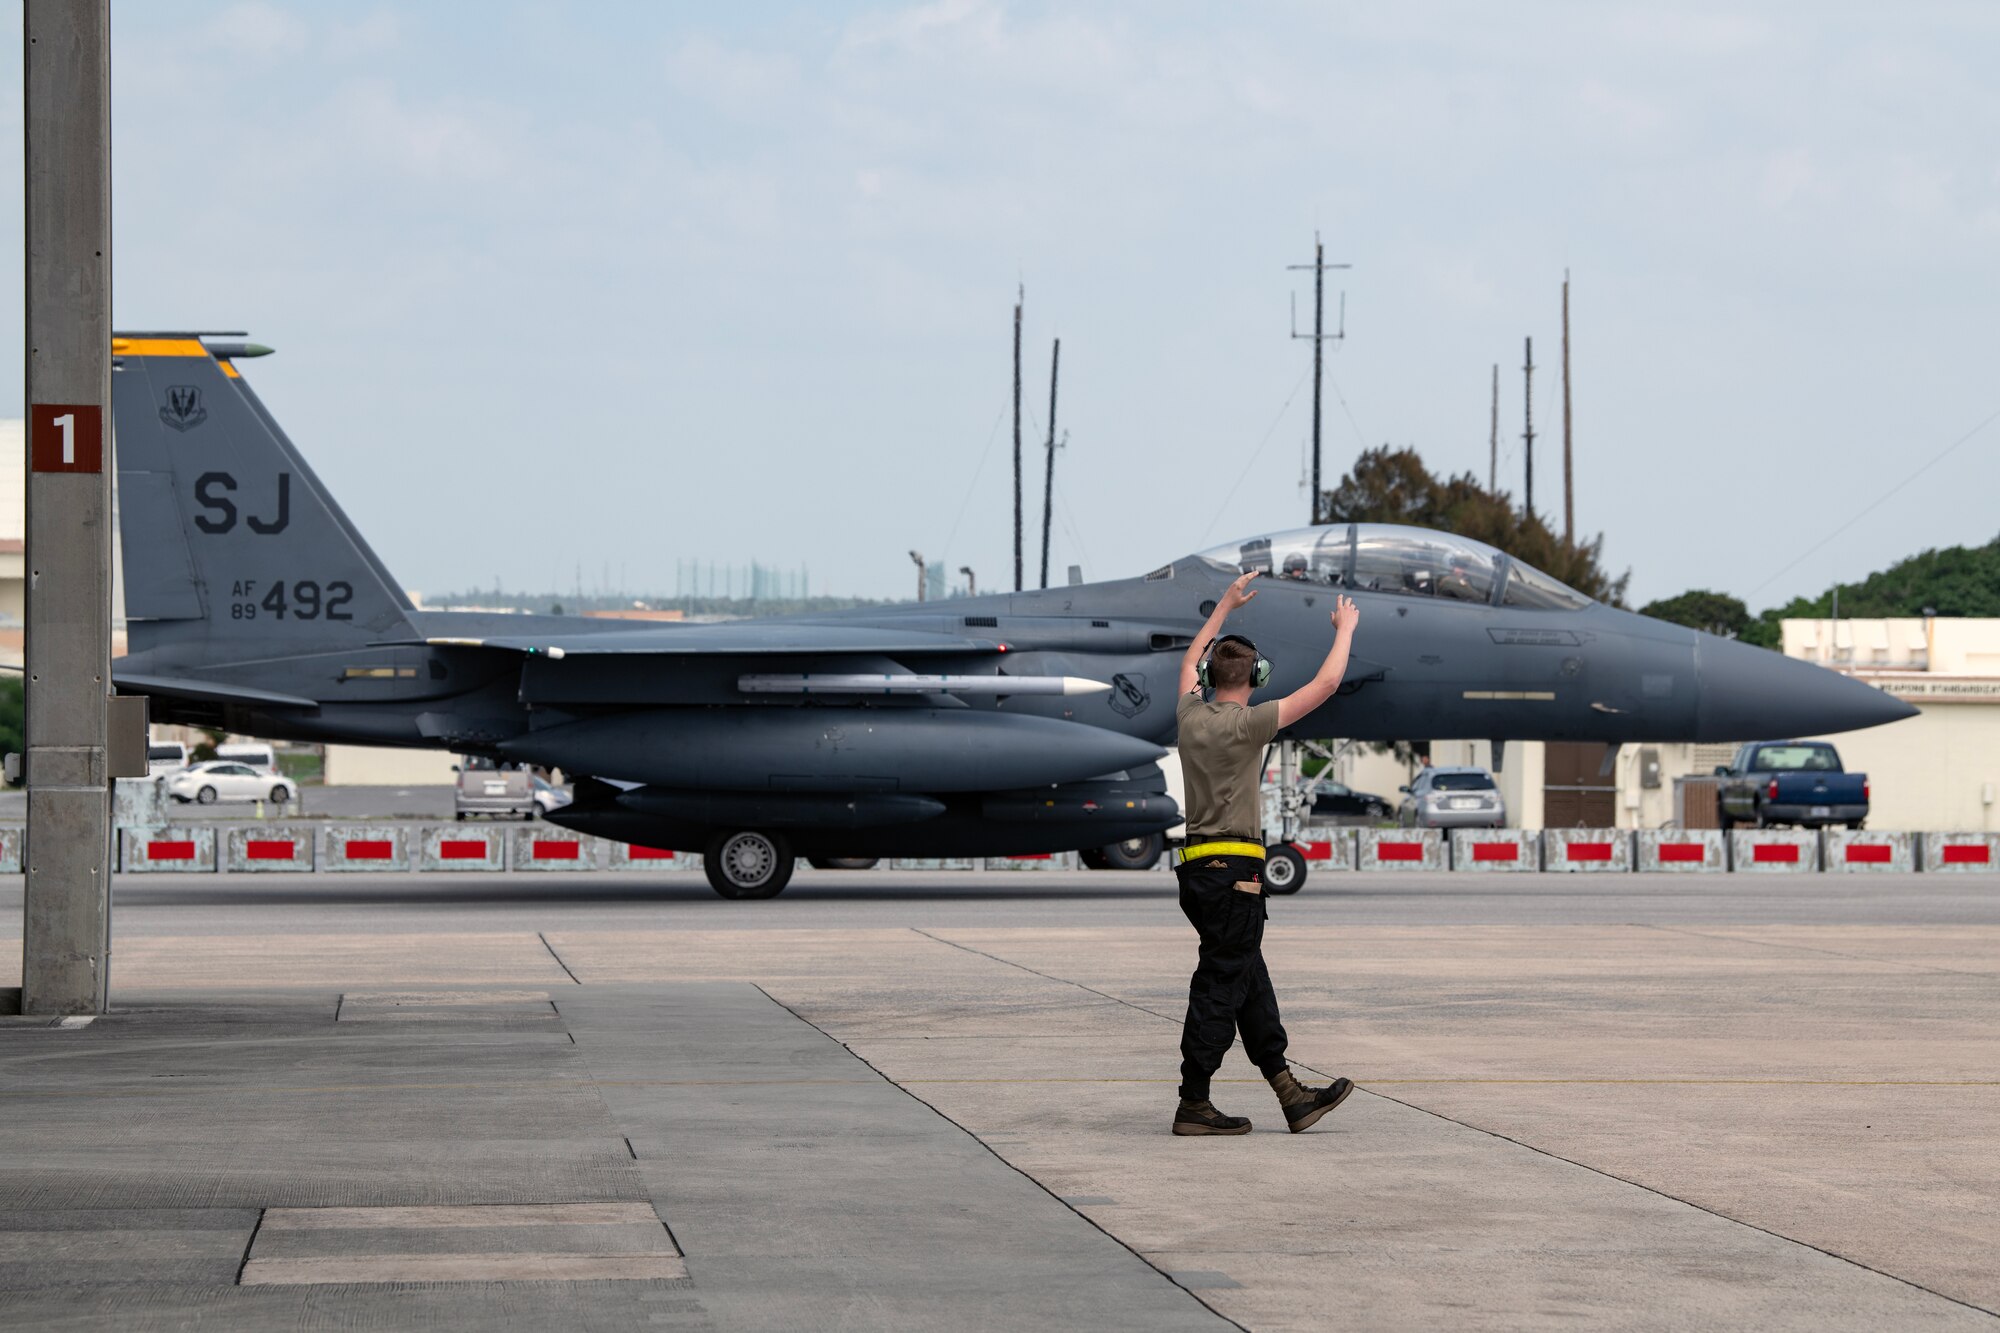 A U.S. Air Force crew chief assigned to the 336th Aircraft Maintenance Unit marshals an F-15E Strike Eagle onto the apron at Kadena Air Base, Japan, April 8, 2023. The Strike Eagles arrived from Seymour Johnson Air Force Base, North Carolina, to ensure continuous fighter presence through the phased return of Kadena’s fleet of F-15C/D Eagles to the United States. (U.S. Air Force photo by Senior Airman Jessi Roth)